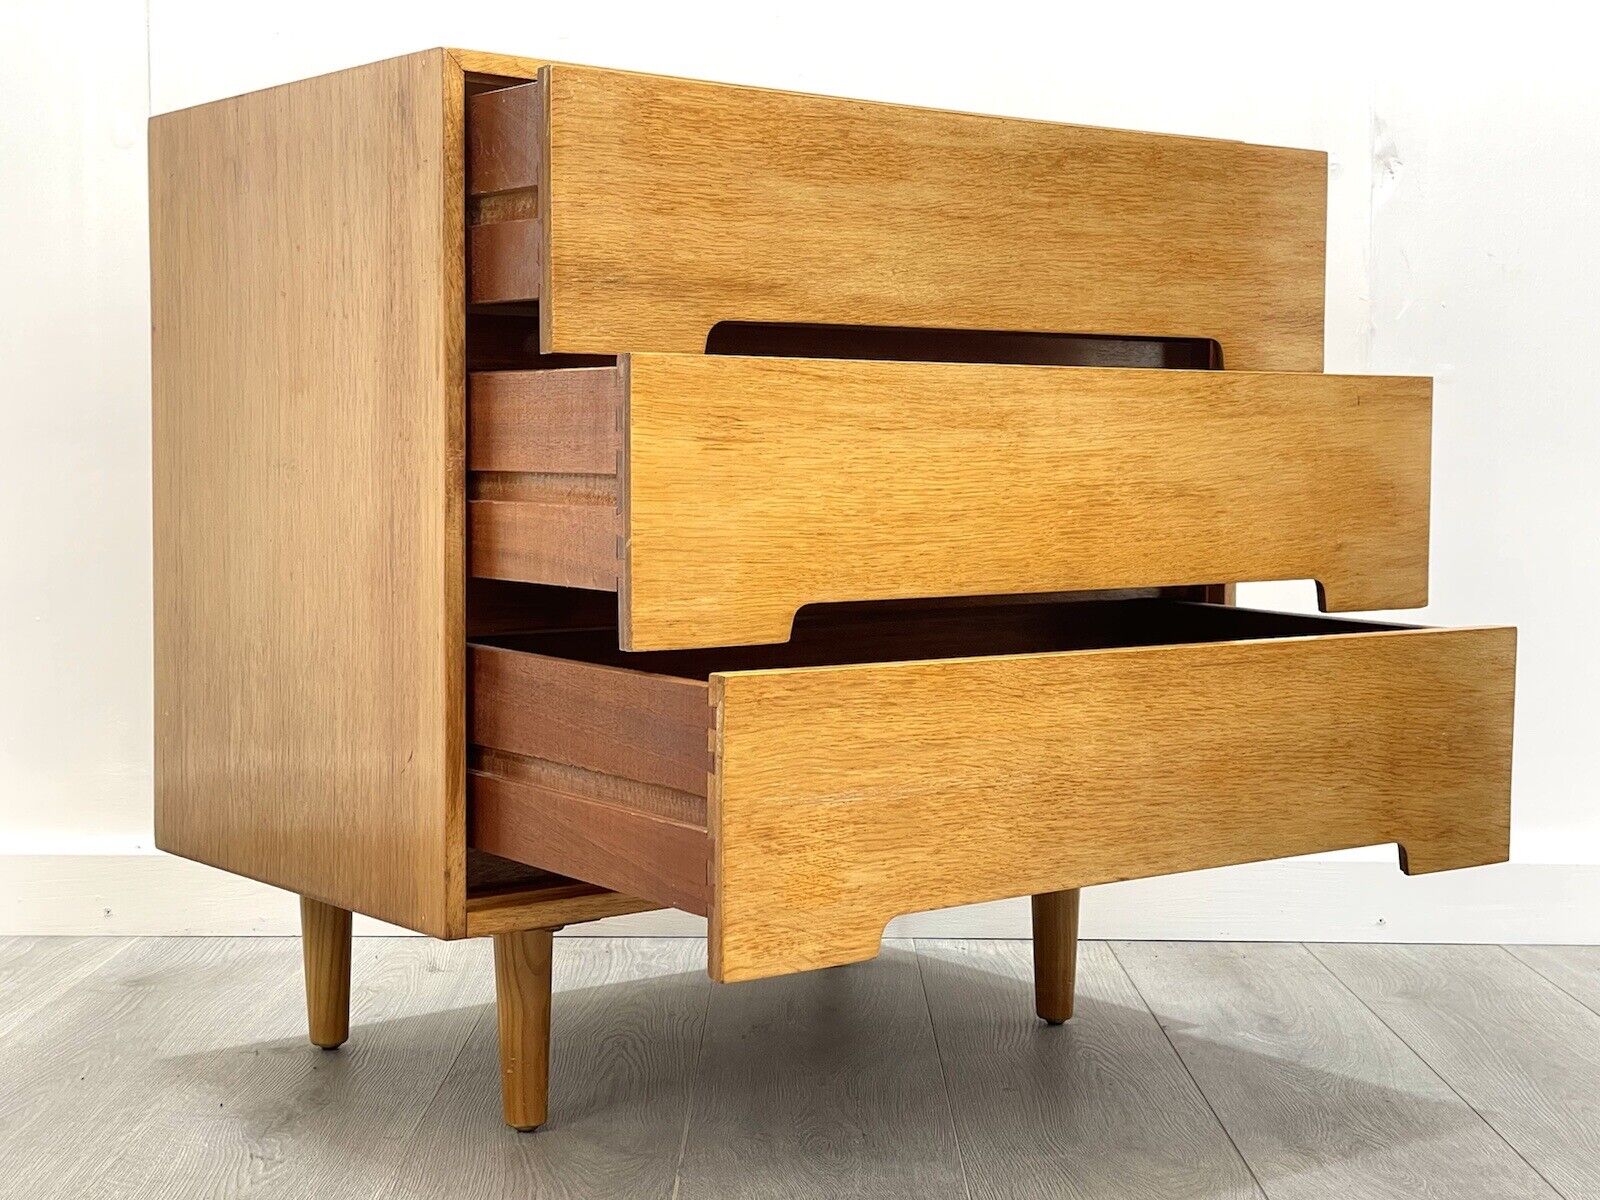 John and Sylvia Reid for Stag, C Range Chest of 3 Drawers